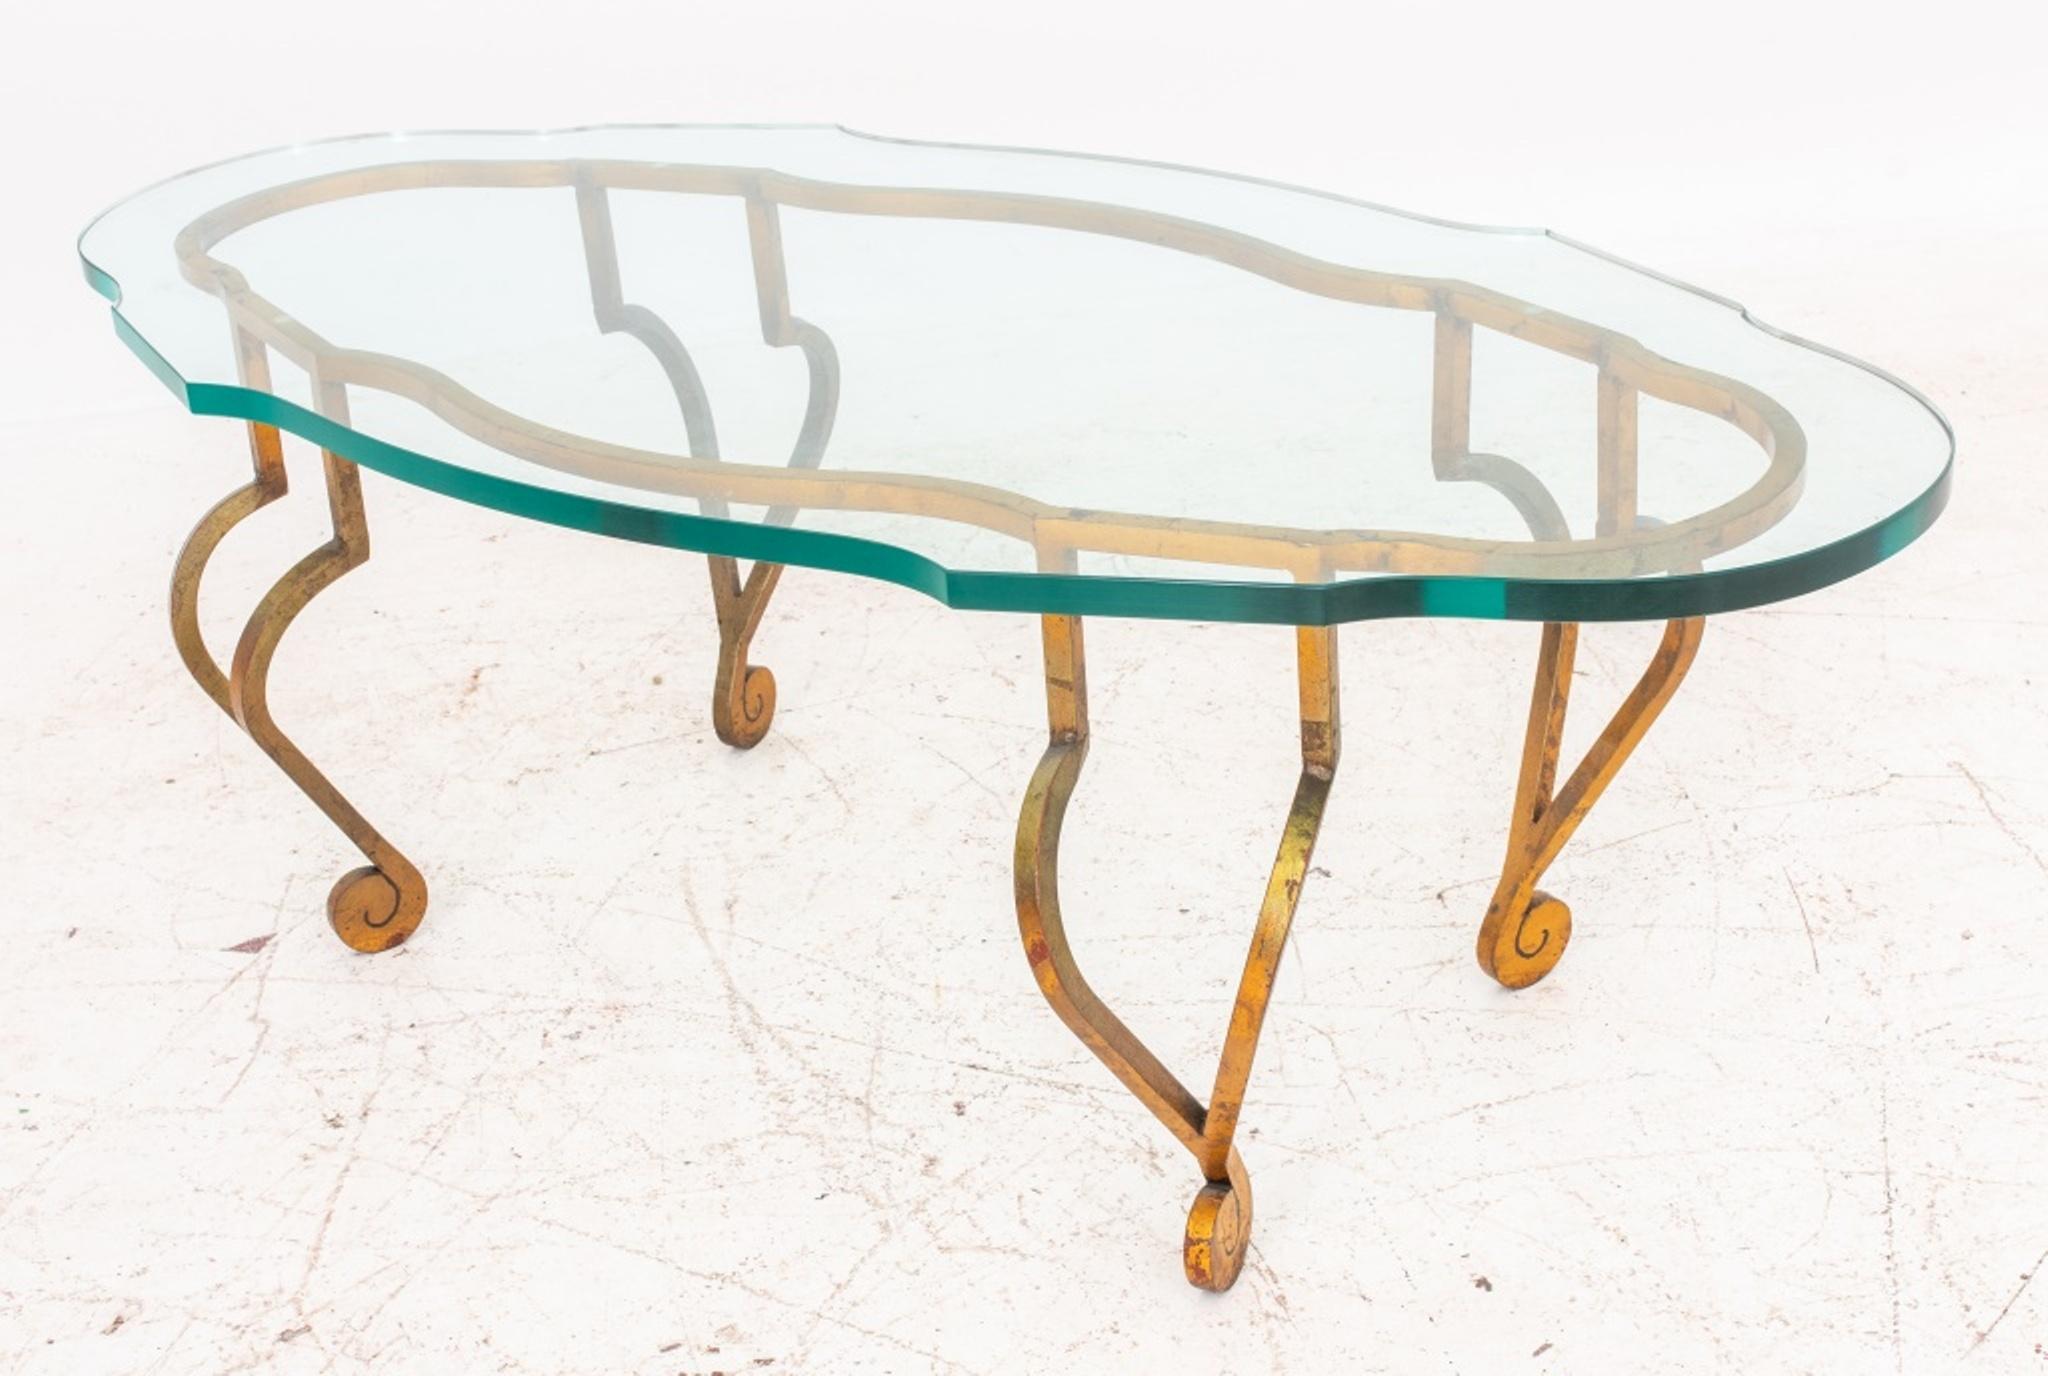 Hollywood Regency gilded wrought iron low coffee or cocktail table, 1950s, after the model by Jean Charles Moreux (French, 1889 - 1956) for Maison Ramsay, with shaped oval top above conforming lacquer-gilded wrought iron base with curving legs in